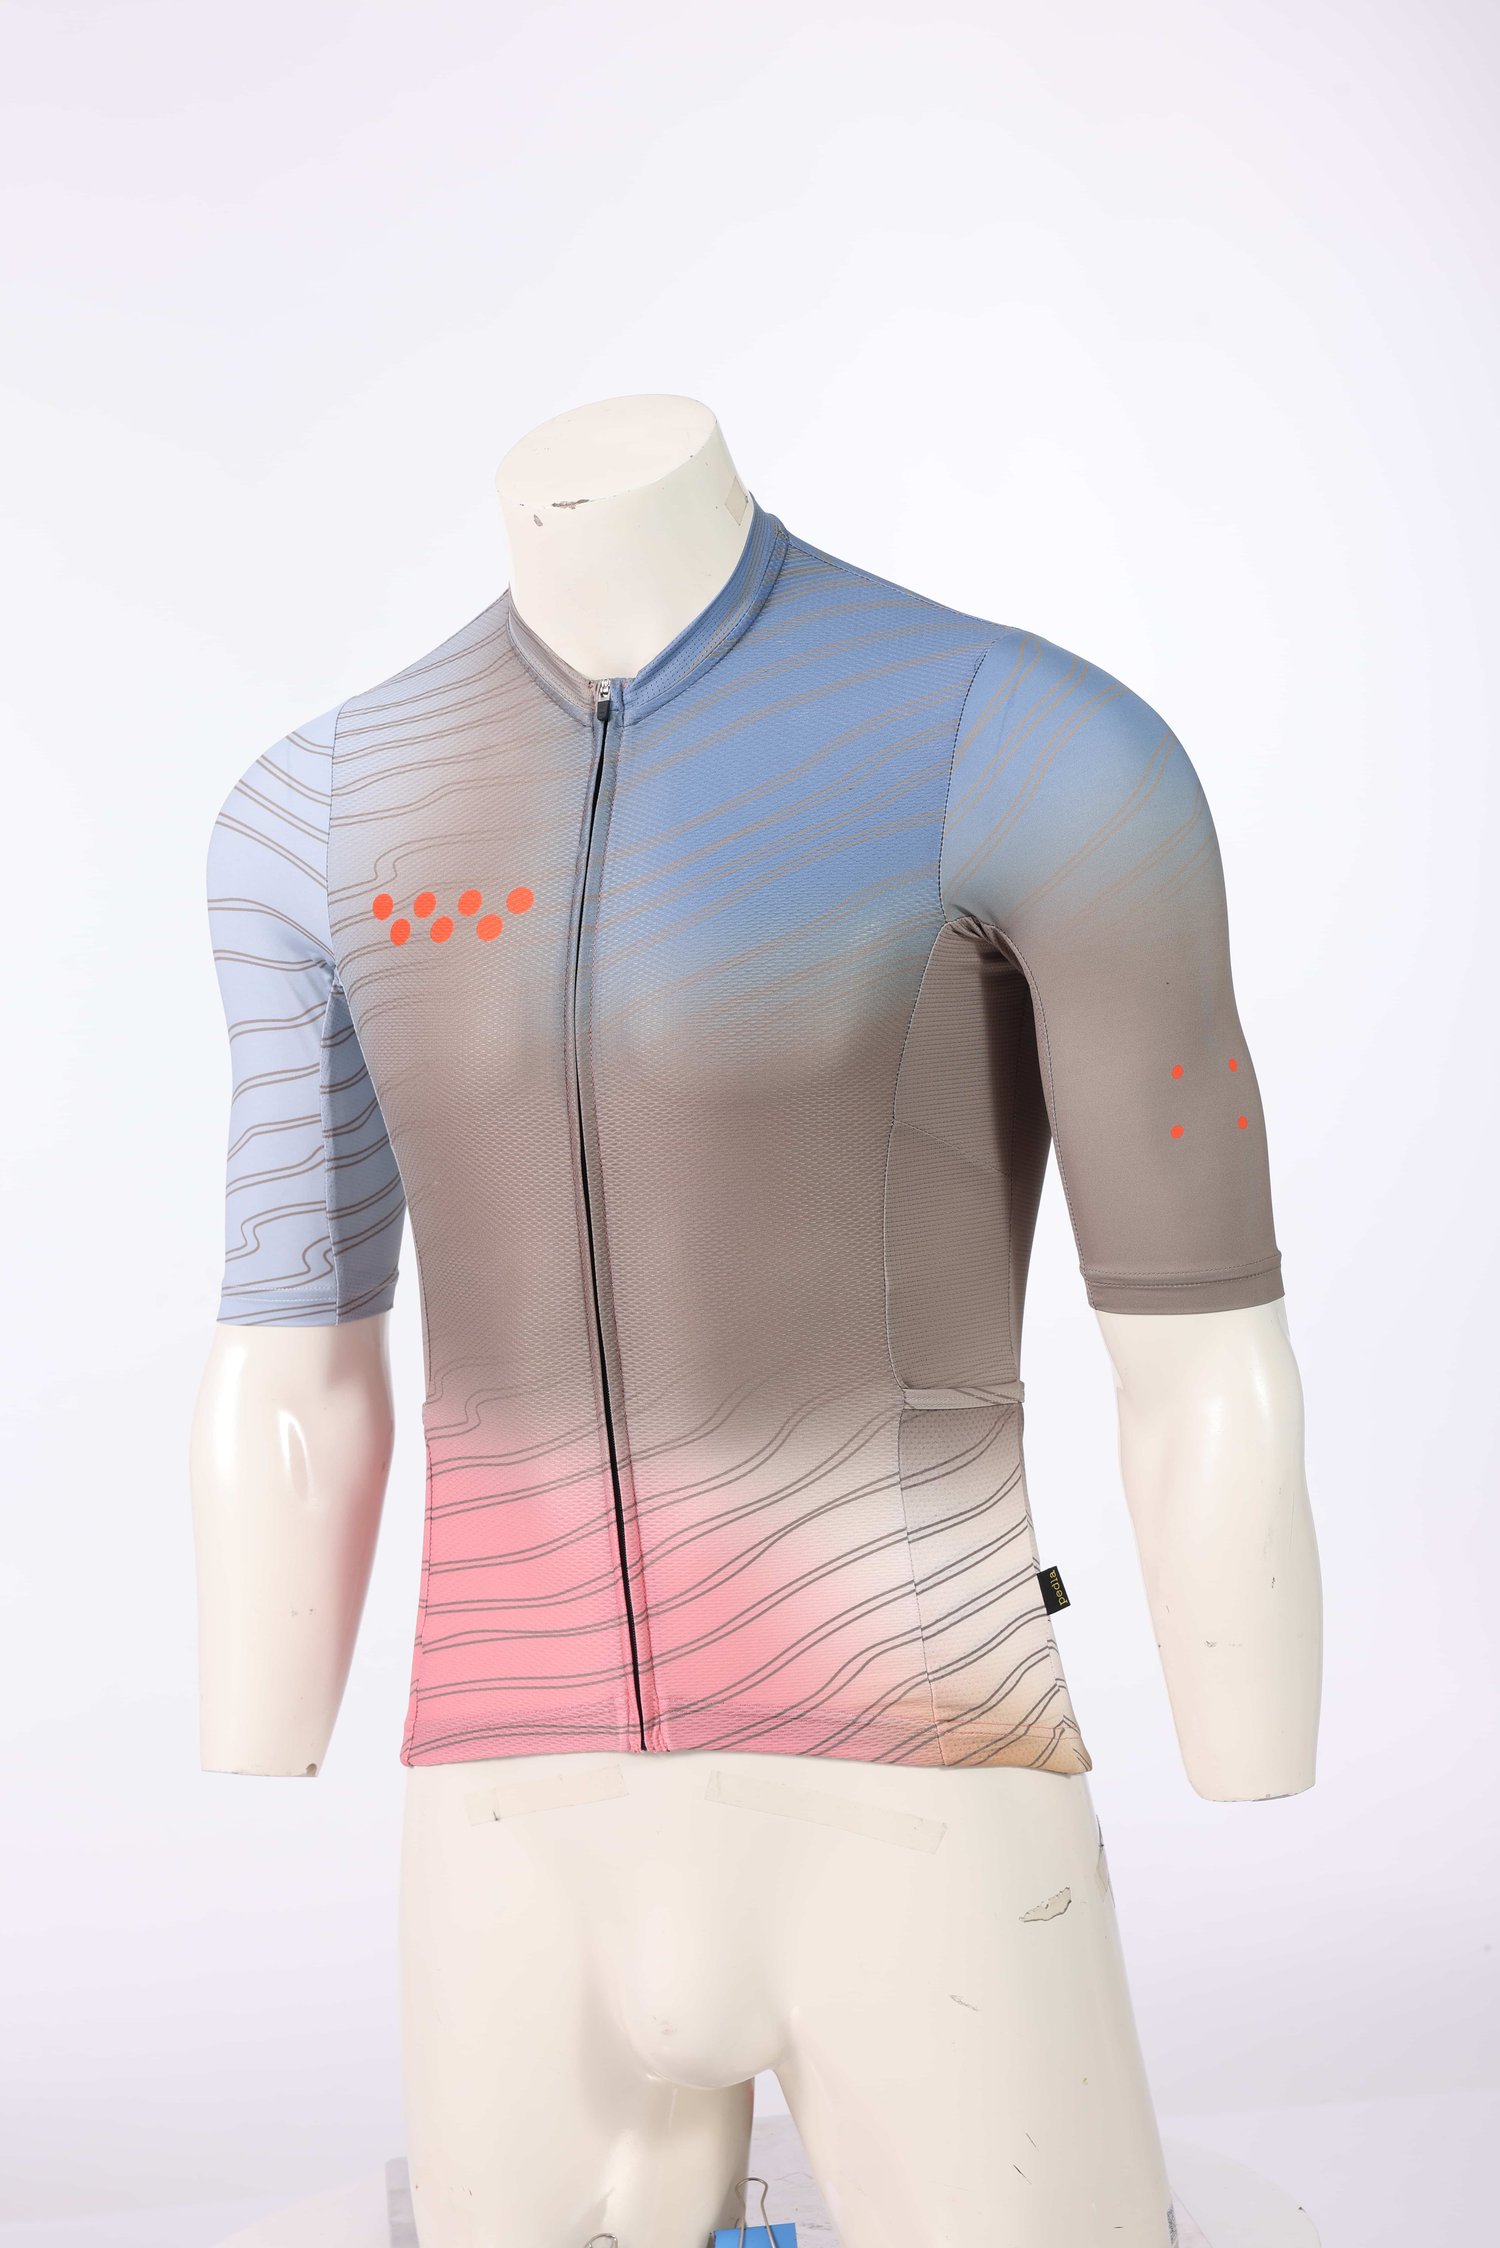 Stitching Color Cycling Wear